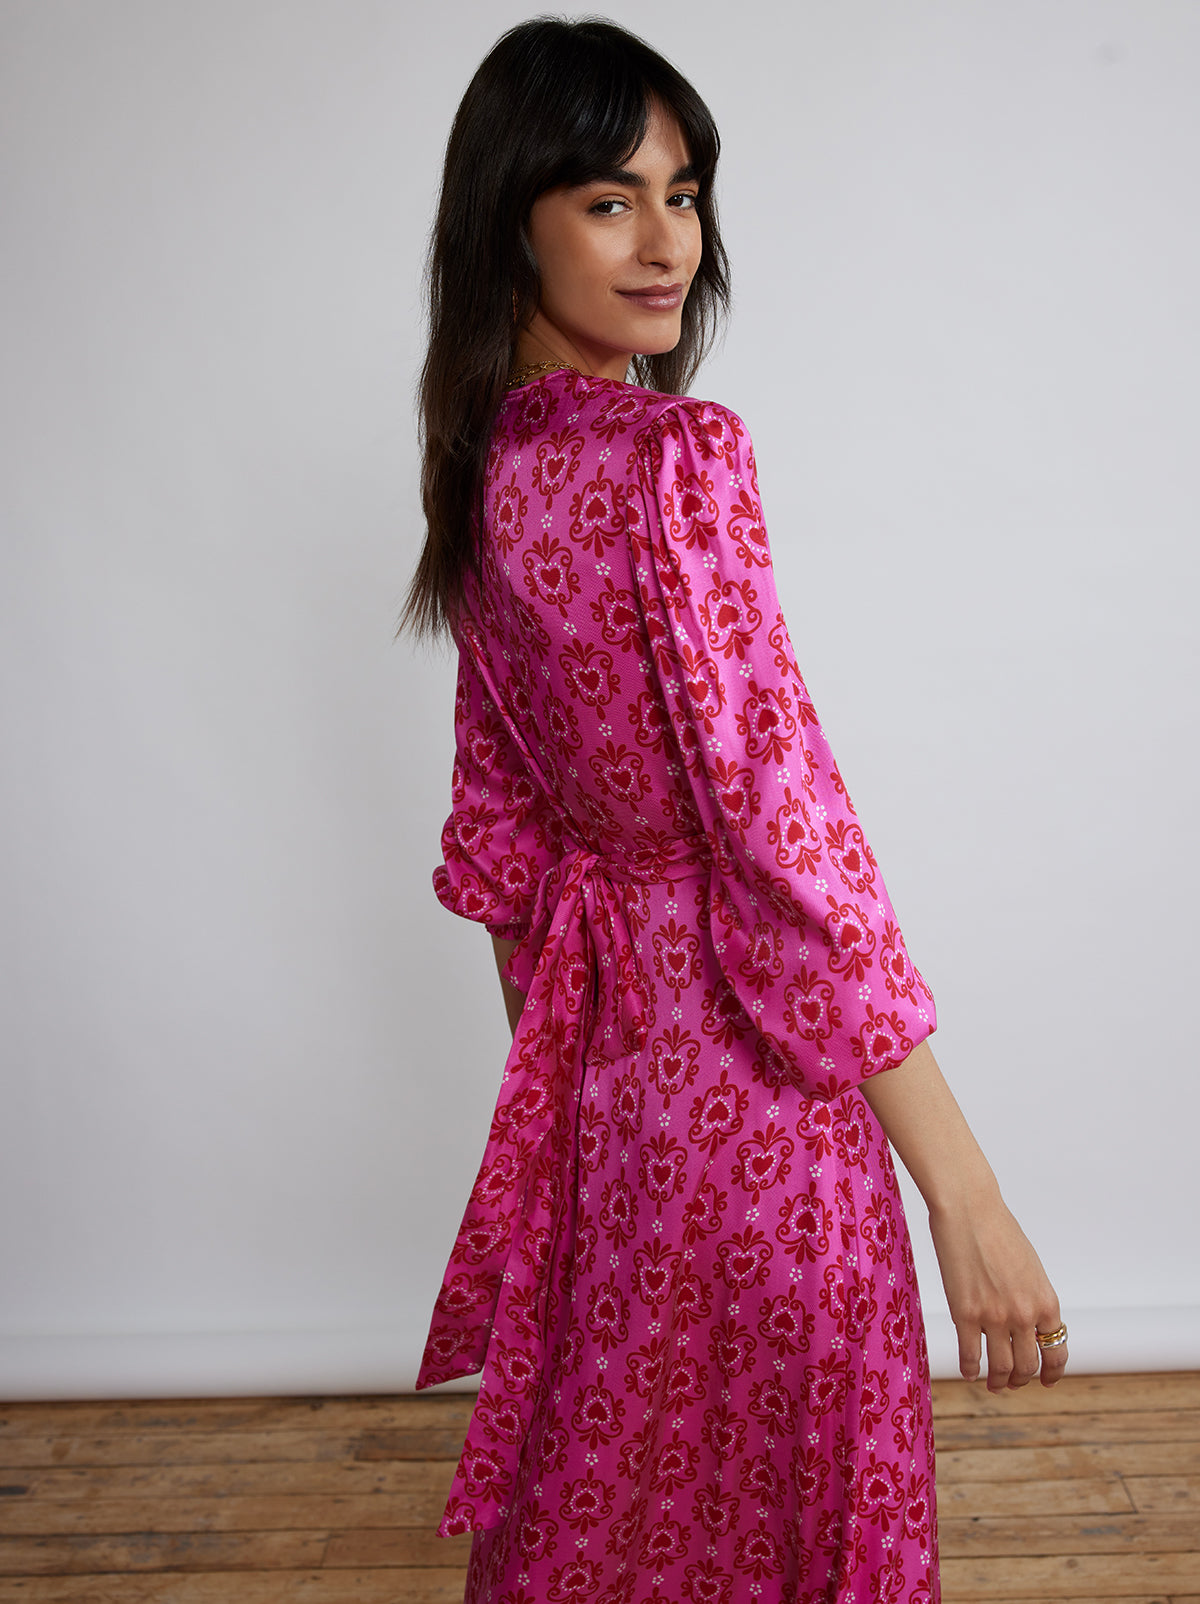 Aurora Pink Heart Print Maxi Dress By KITRI Studio is our bestselling, trending dress. A maxi party dress bursting with 70s style with its standout retro pink hearts printed fabric has voluminous flowy sleeves & cross-cross ribbon tie belt. A longline floaty summer dress, ideal for weddings and special occasions - as well as a popular pregnancy dress option